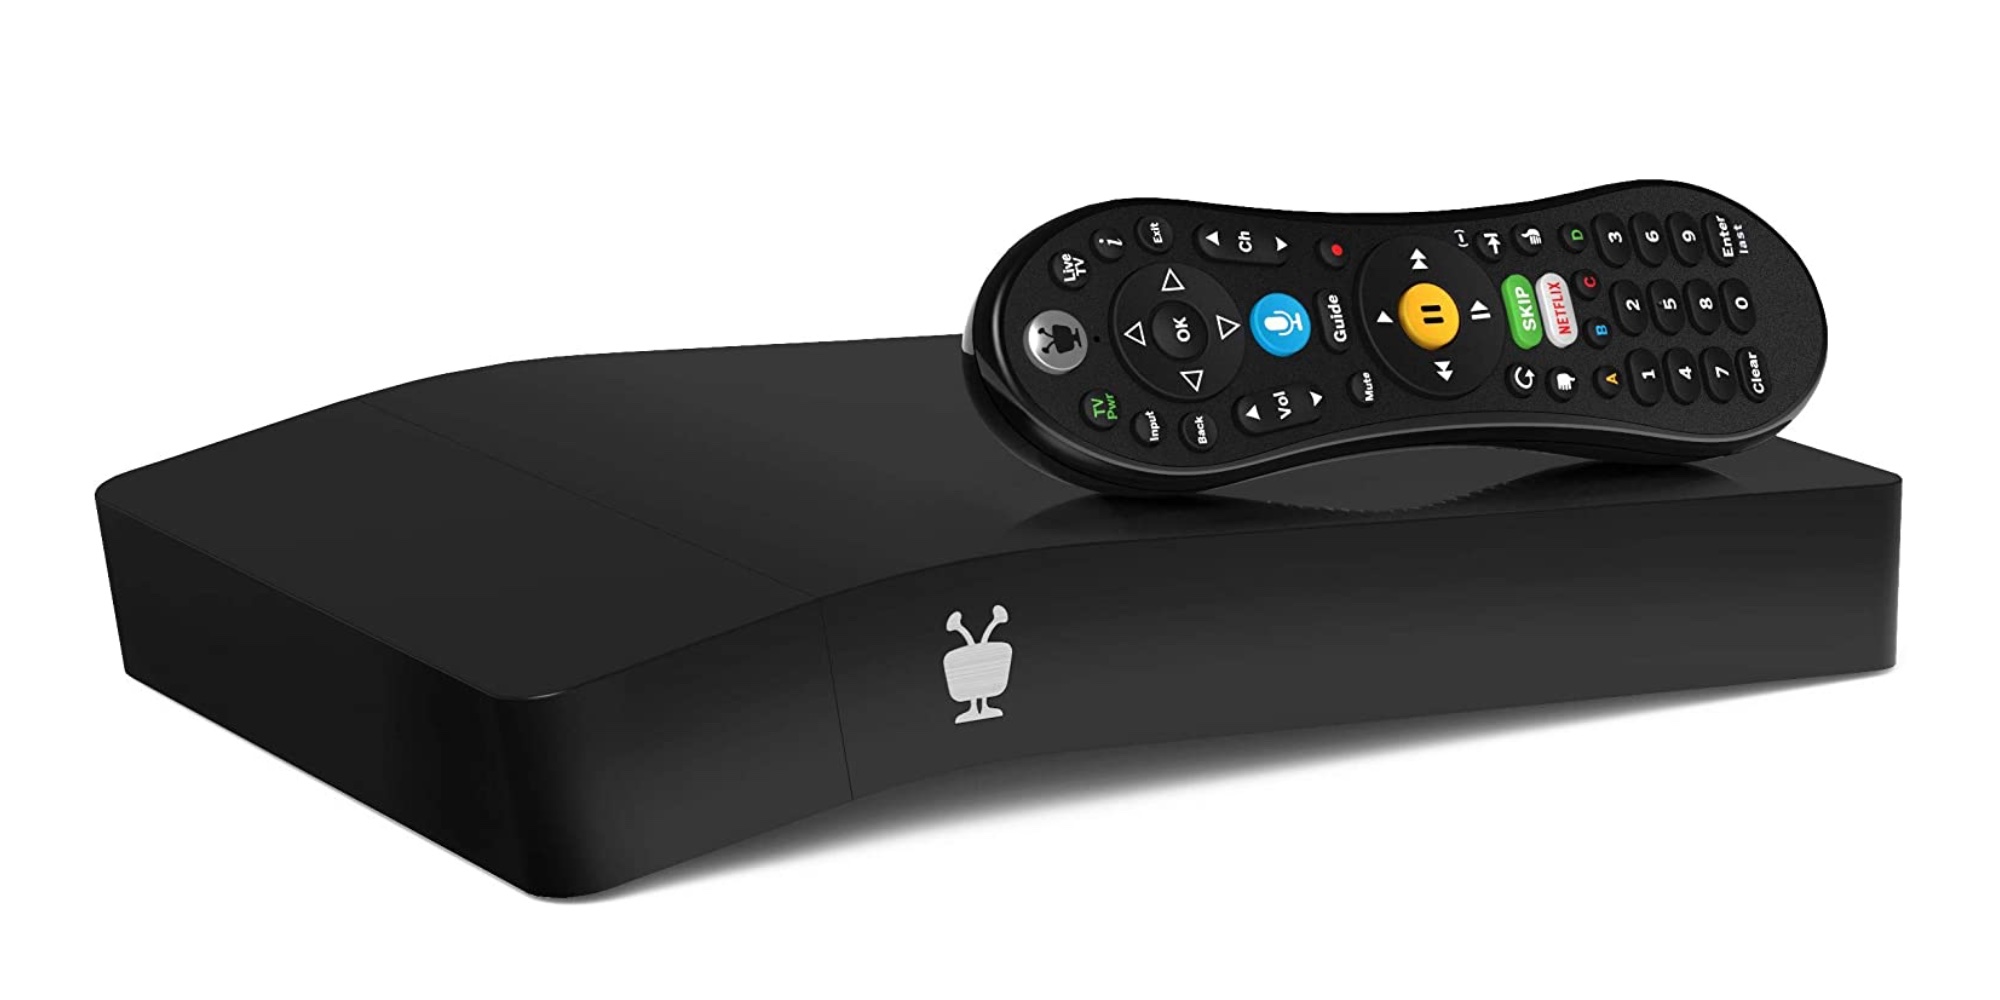 ctivo mpeg4 player to skip commercials